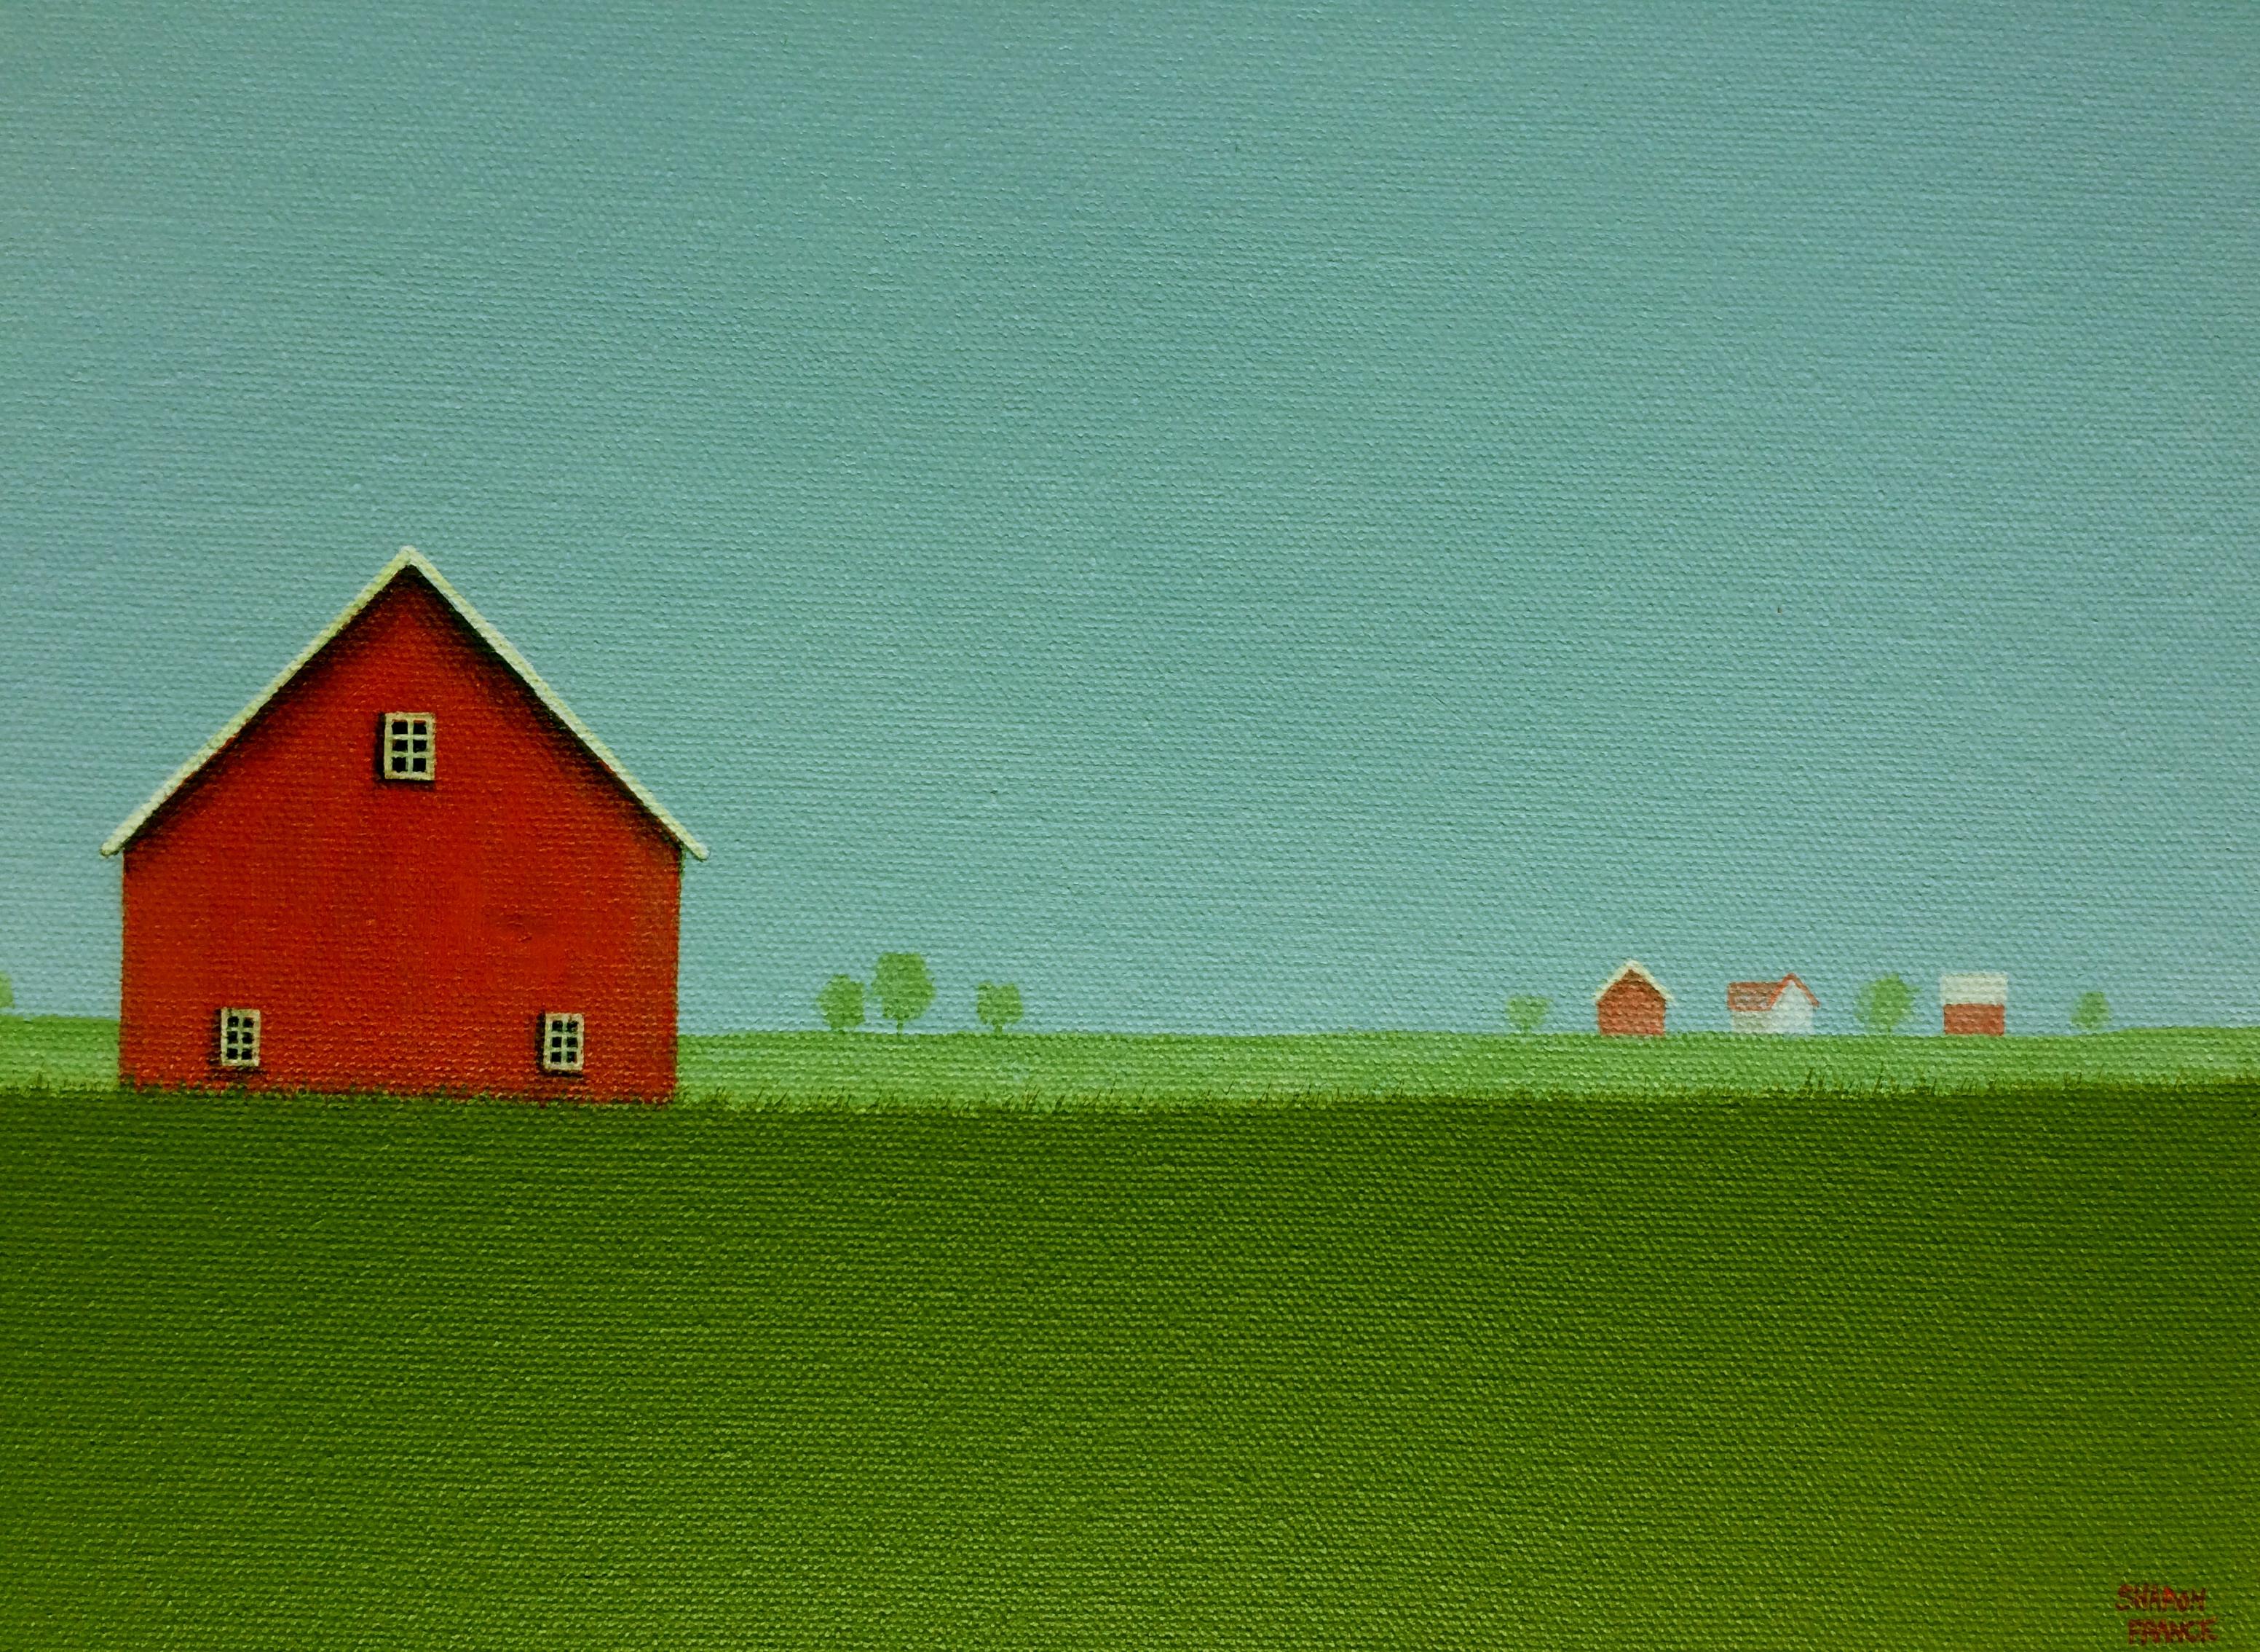 Red Barn on an Overcast Day - Painting by Sharon  France